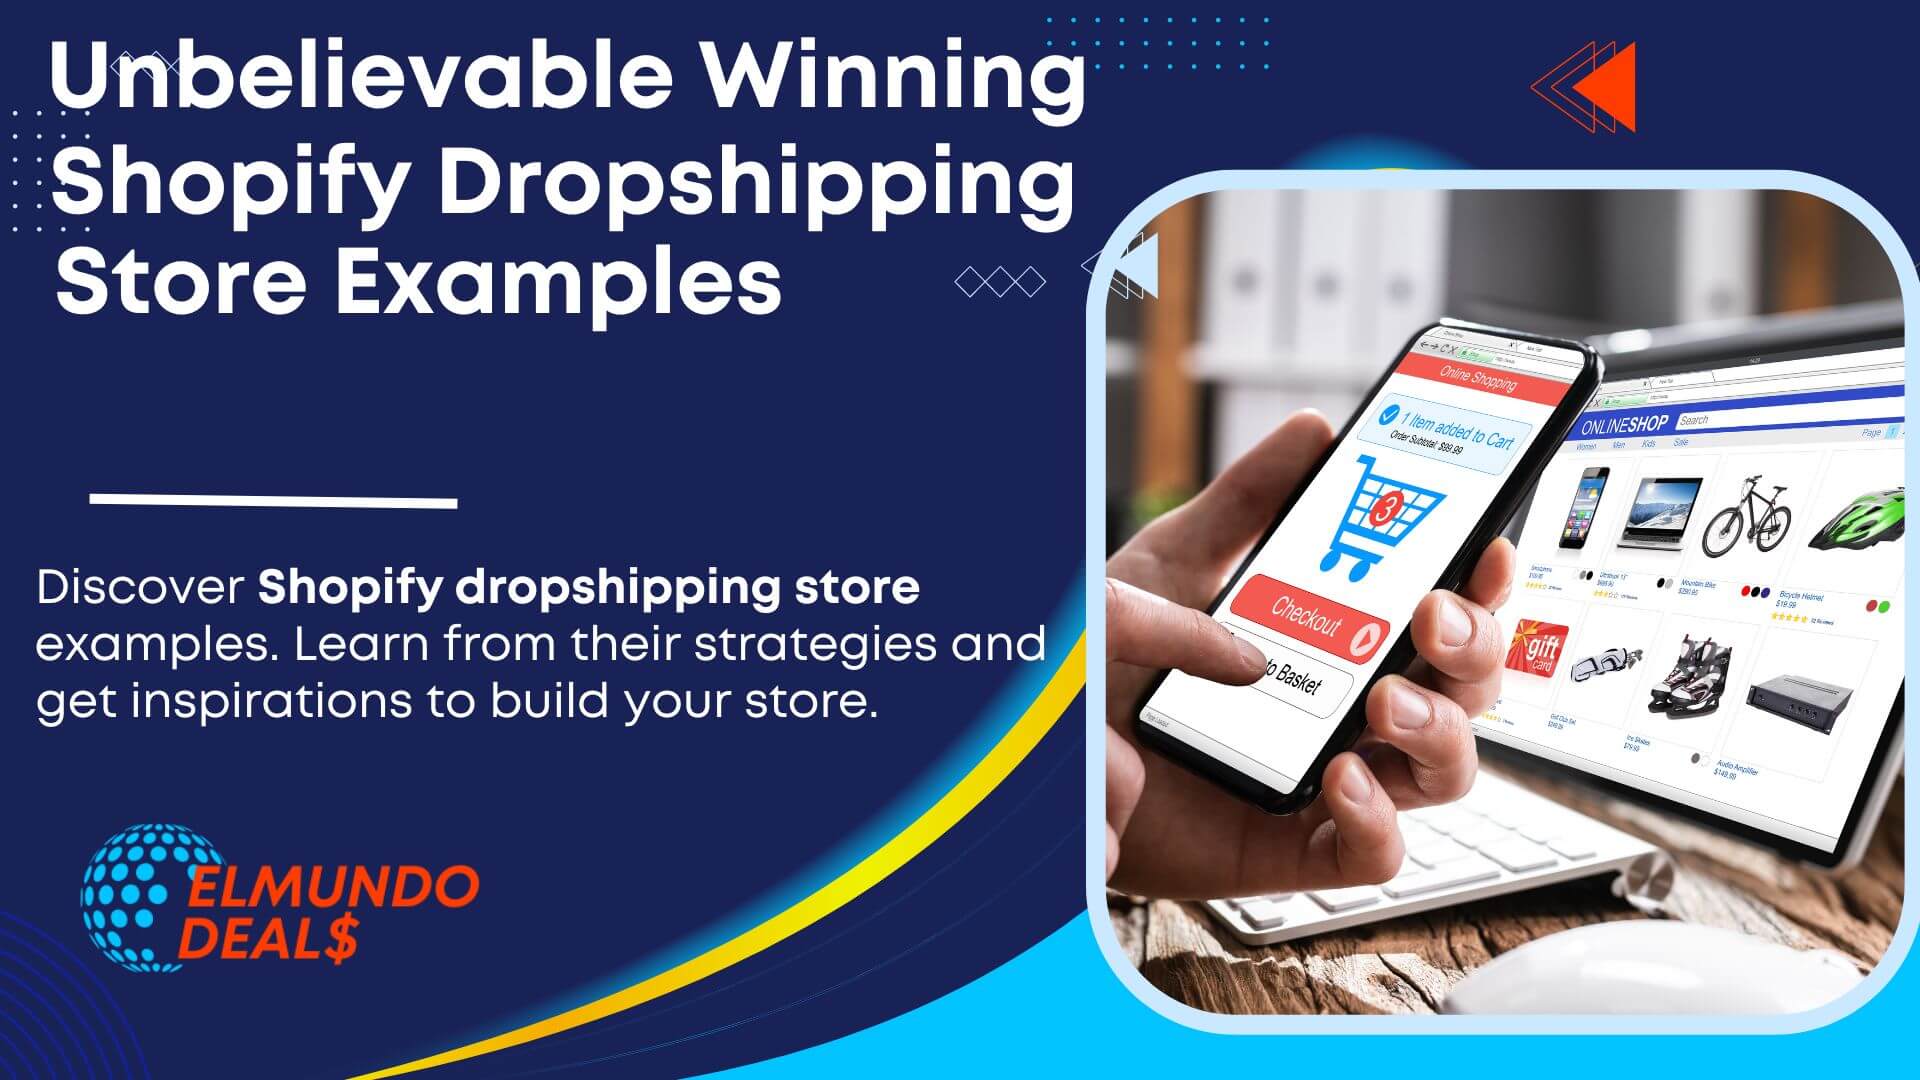 Unbelievable Winning Shopify Dropshipping Store Examples